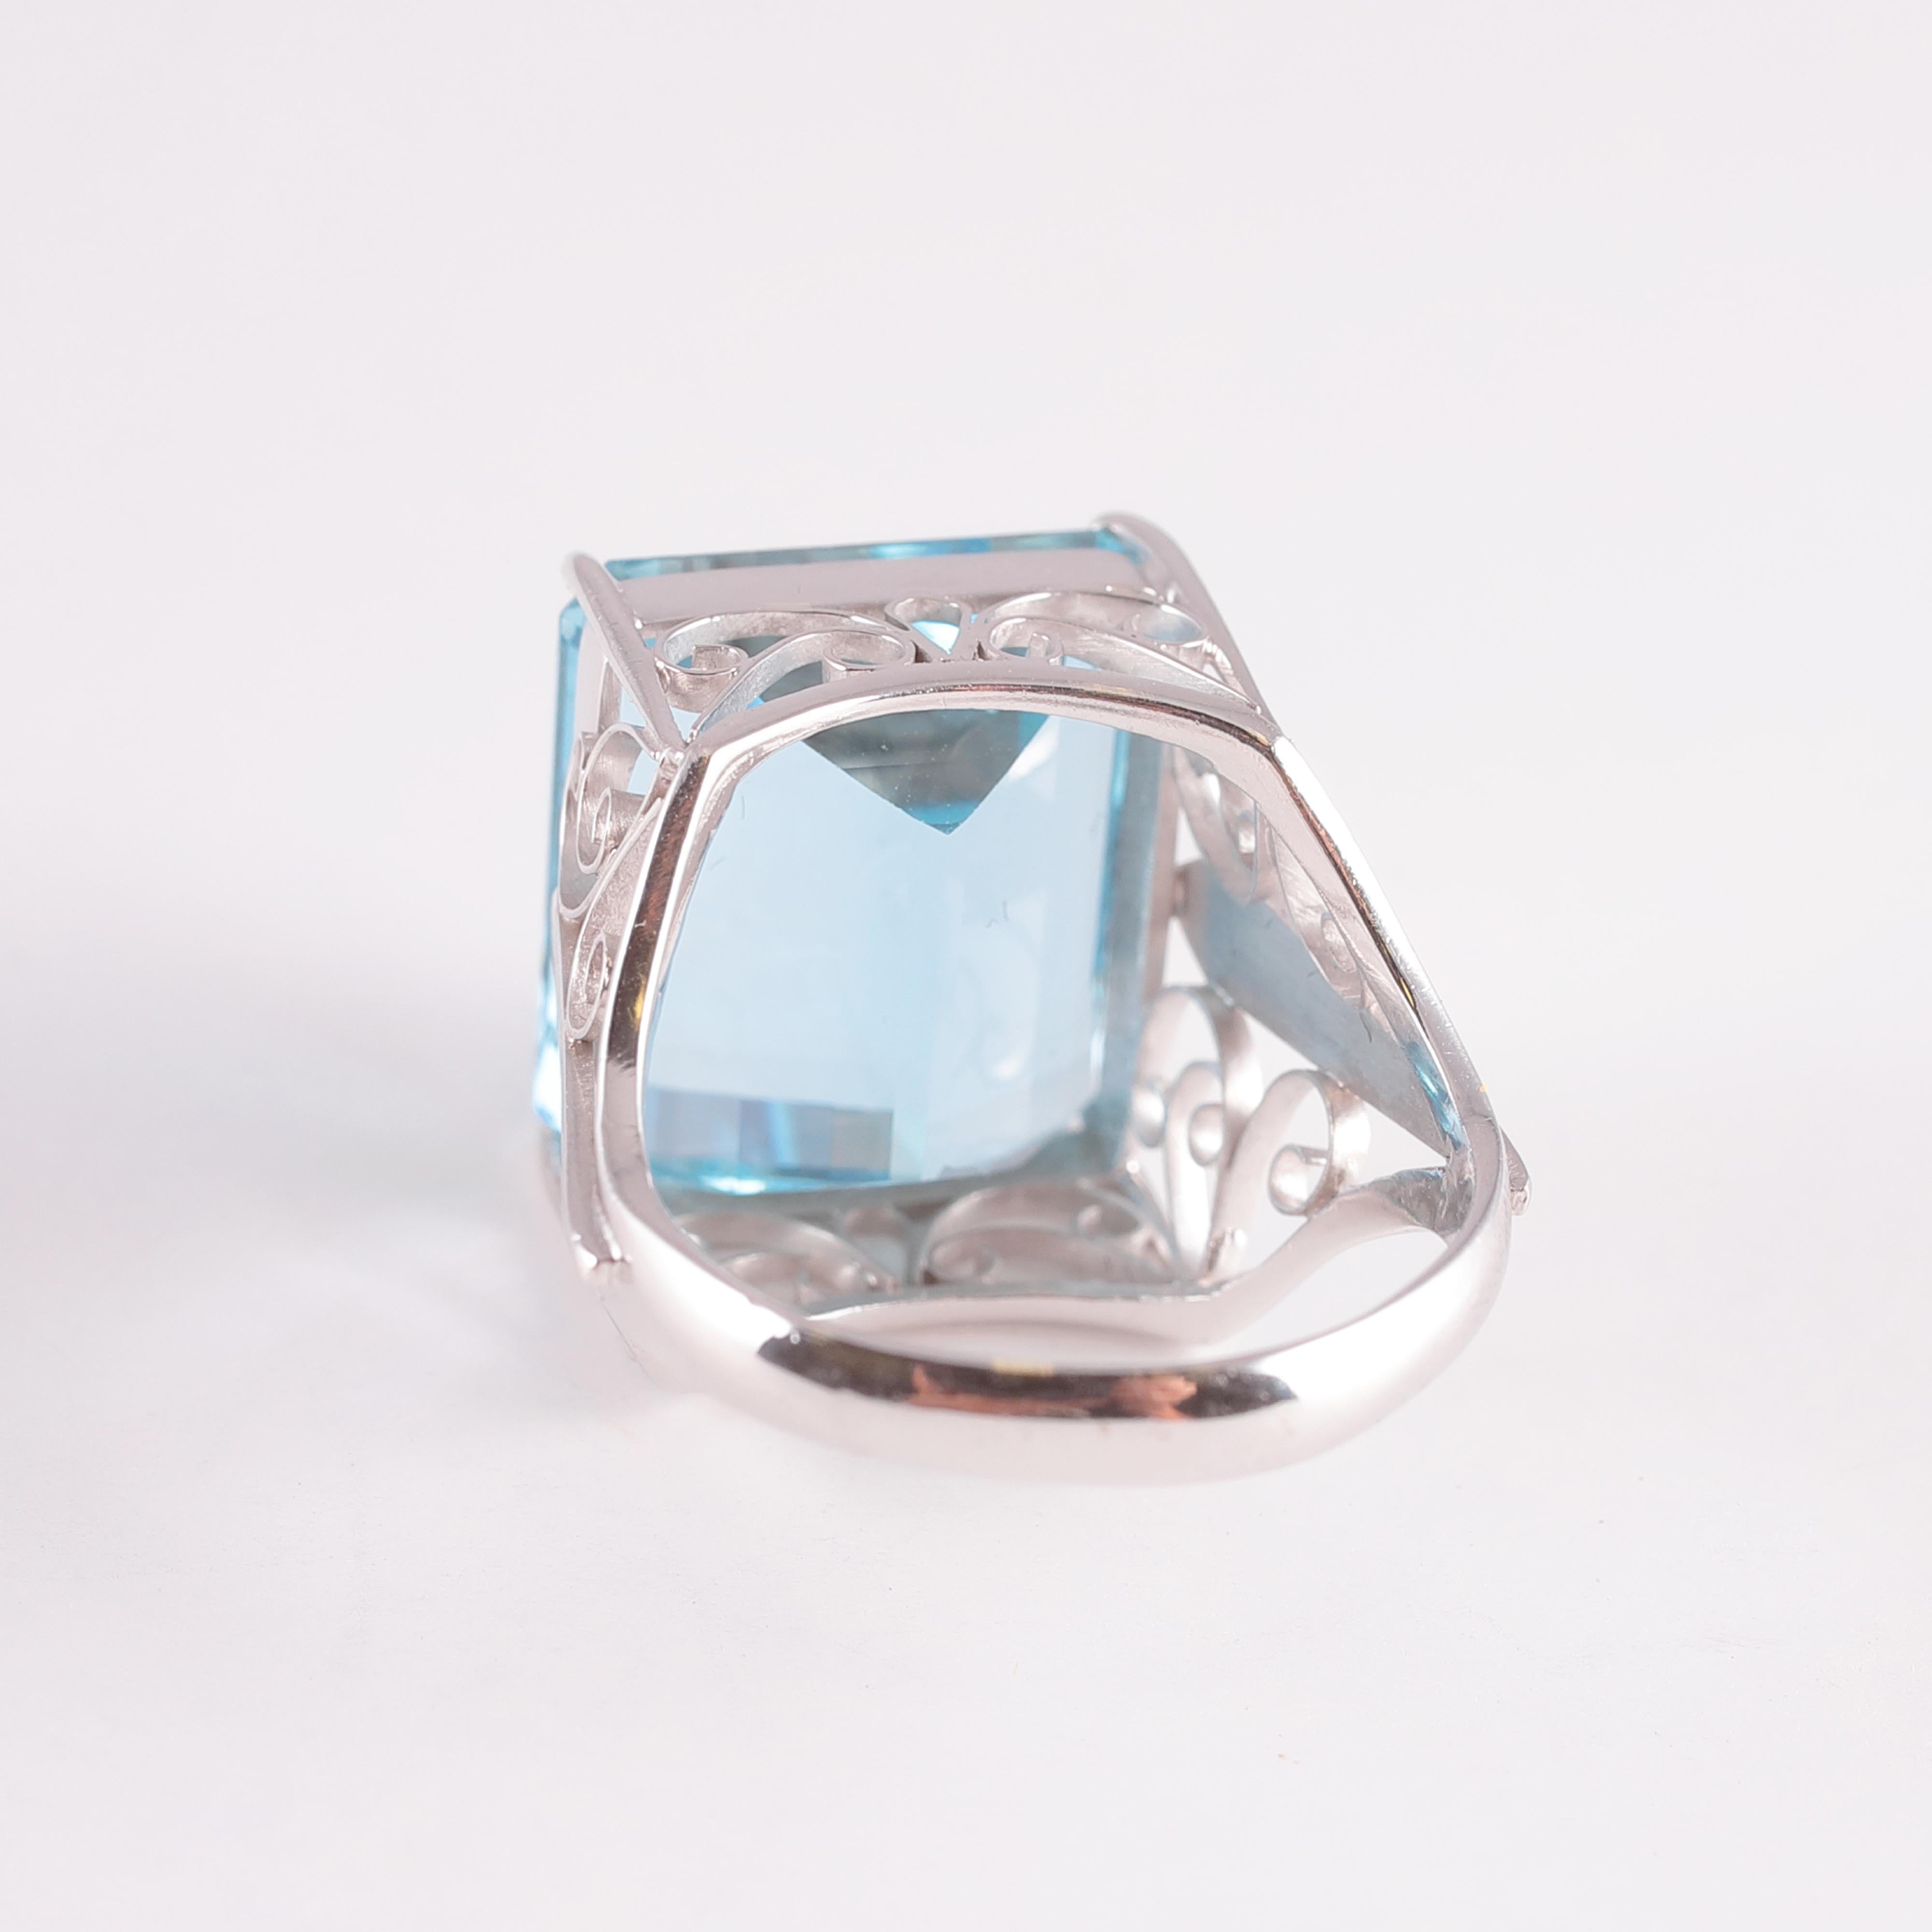 The blue color of this aquamarine is simply lovely! Purchased from A. B. Levy out of a Florida estate, this 14.00 carat stunner is in 18 karat white gold. The mounting is as lovely as the stone! Size 5 1/2.